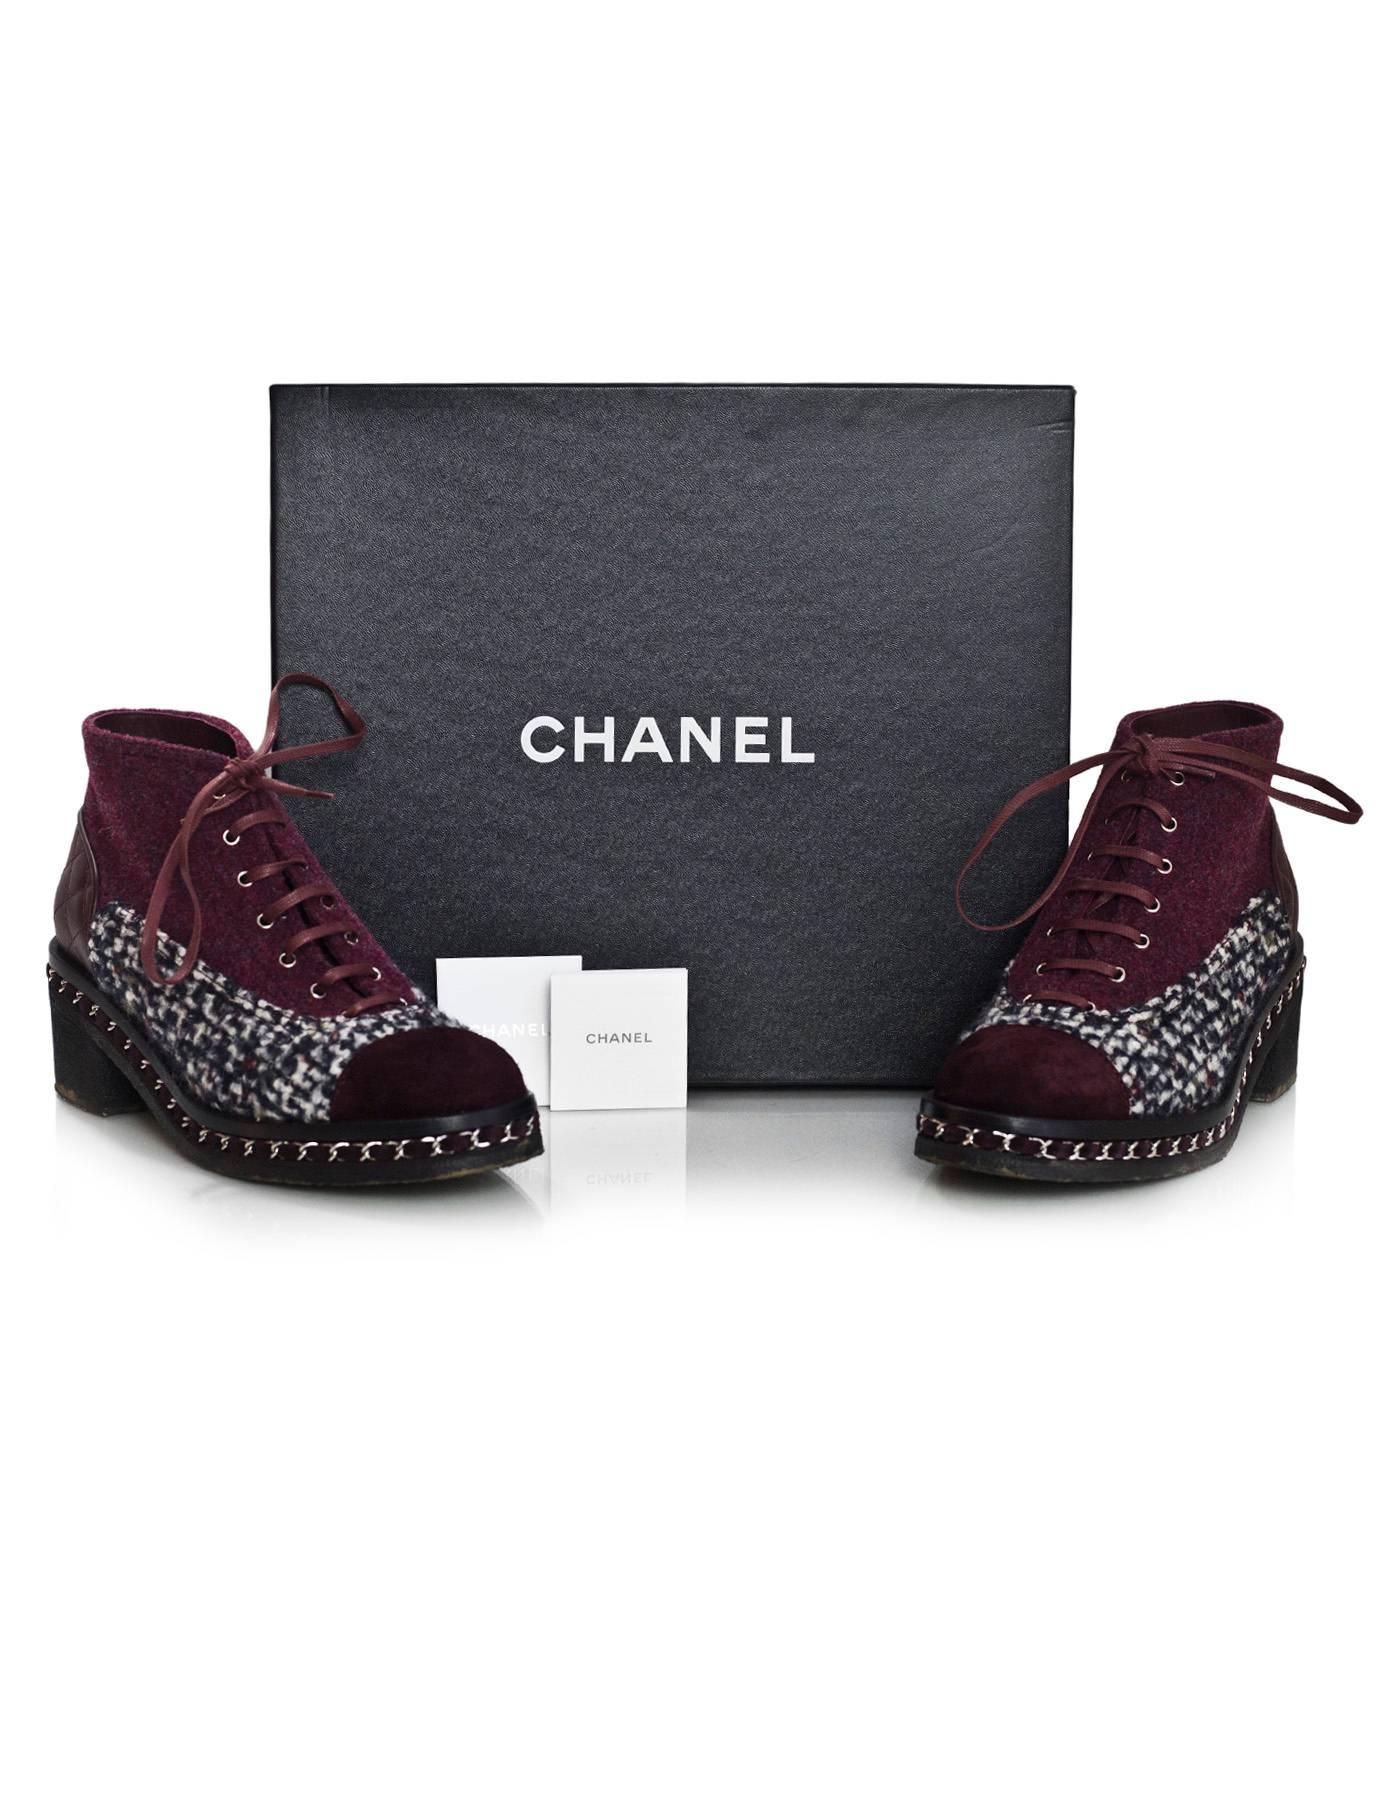 Chanel Burgundy, Black & White Tweed Boots Sz 39 with Box 2